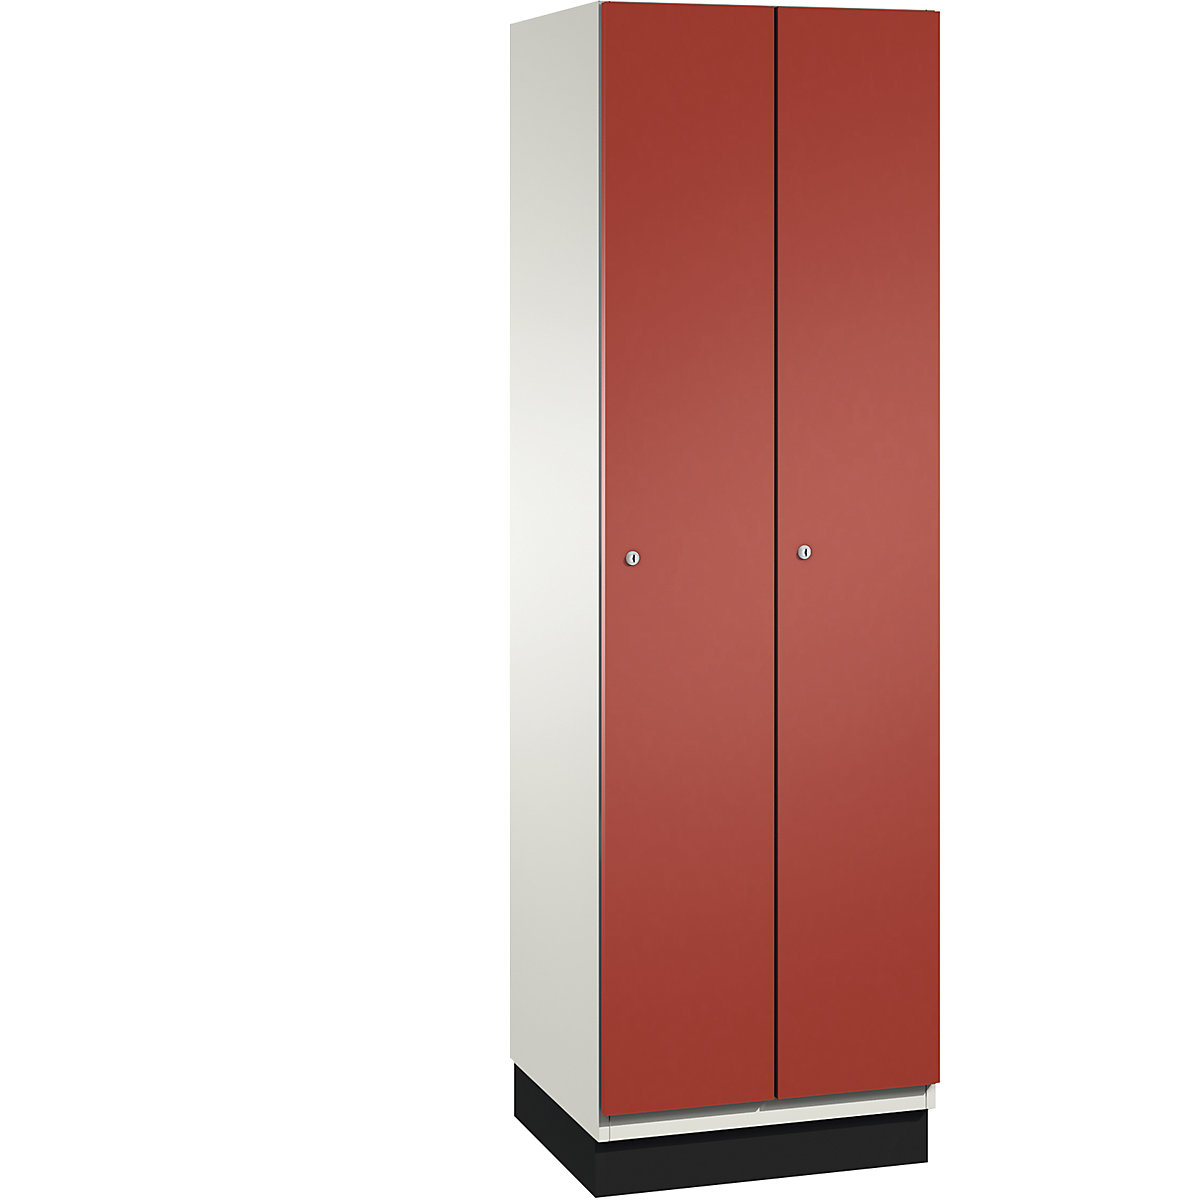 CAMBIO cloakroom locker with sheet steel doors – C+P, 2 compartments, 600 mm wide, body pure white / door flame red-10